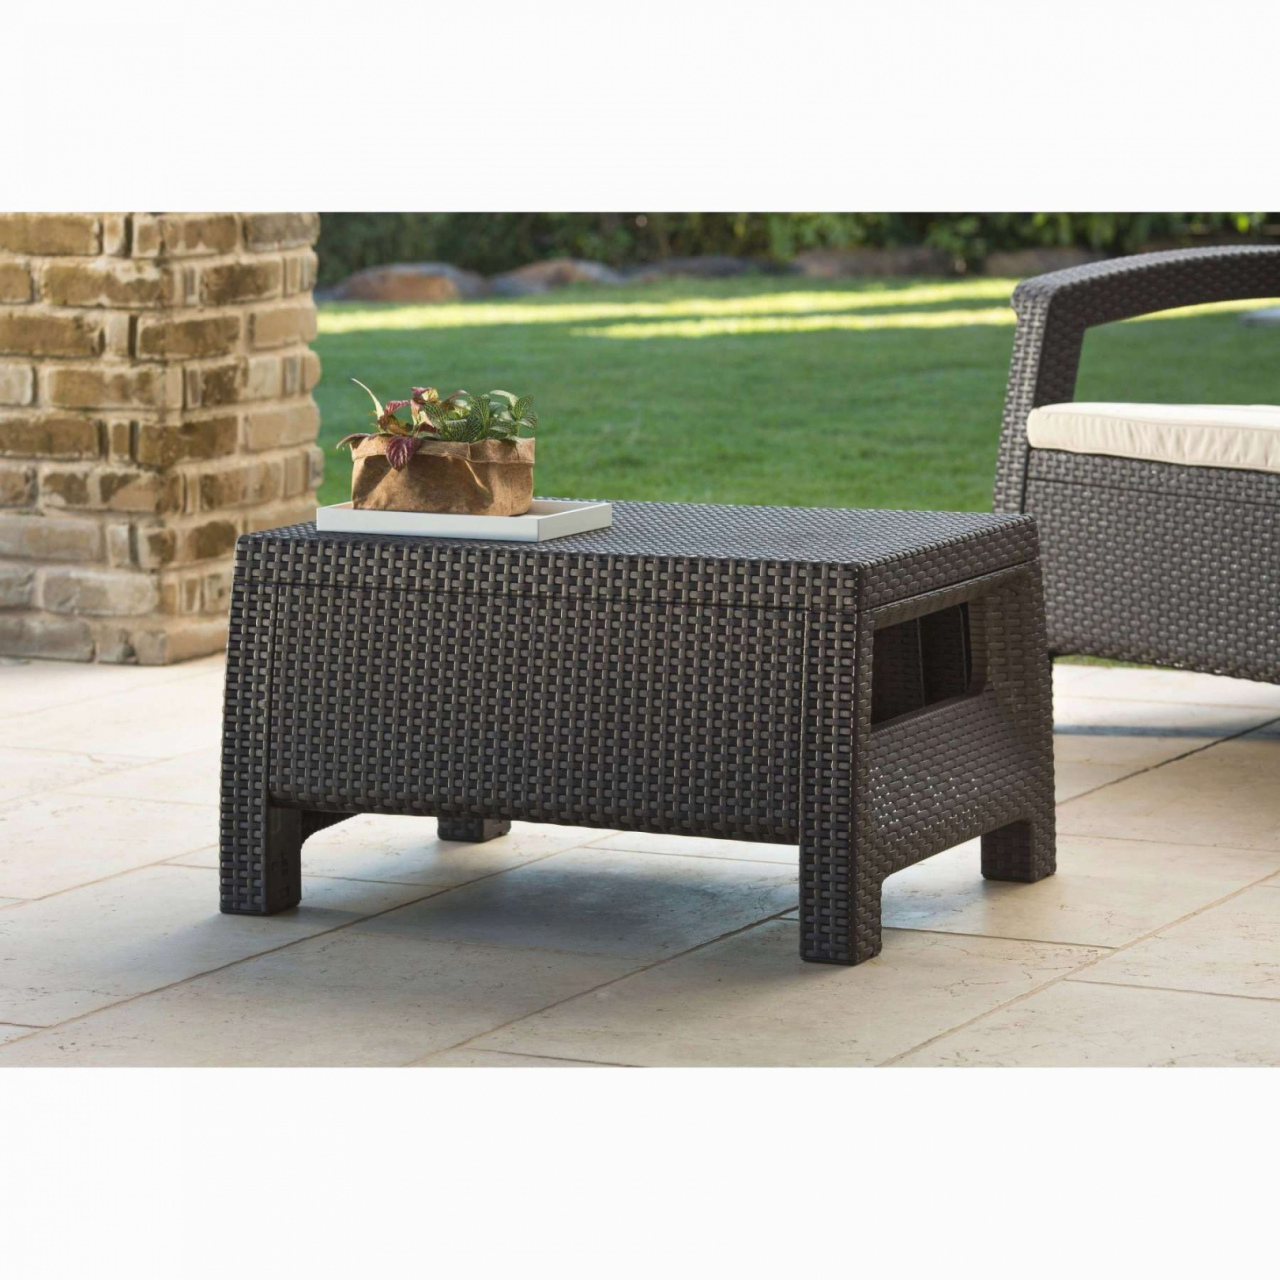 patio daybed rattan porch furniture basic wicker outdoor sofa 0d patio chairs durch patio daybed